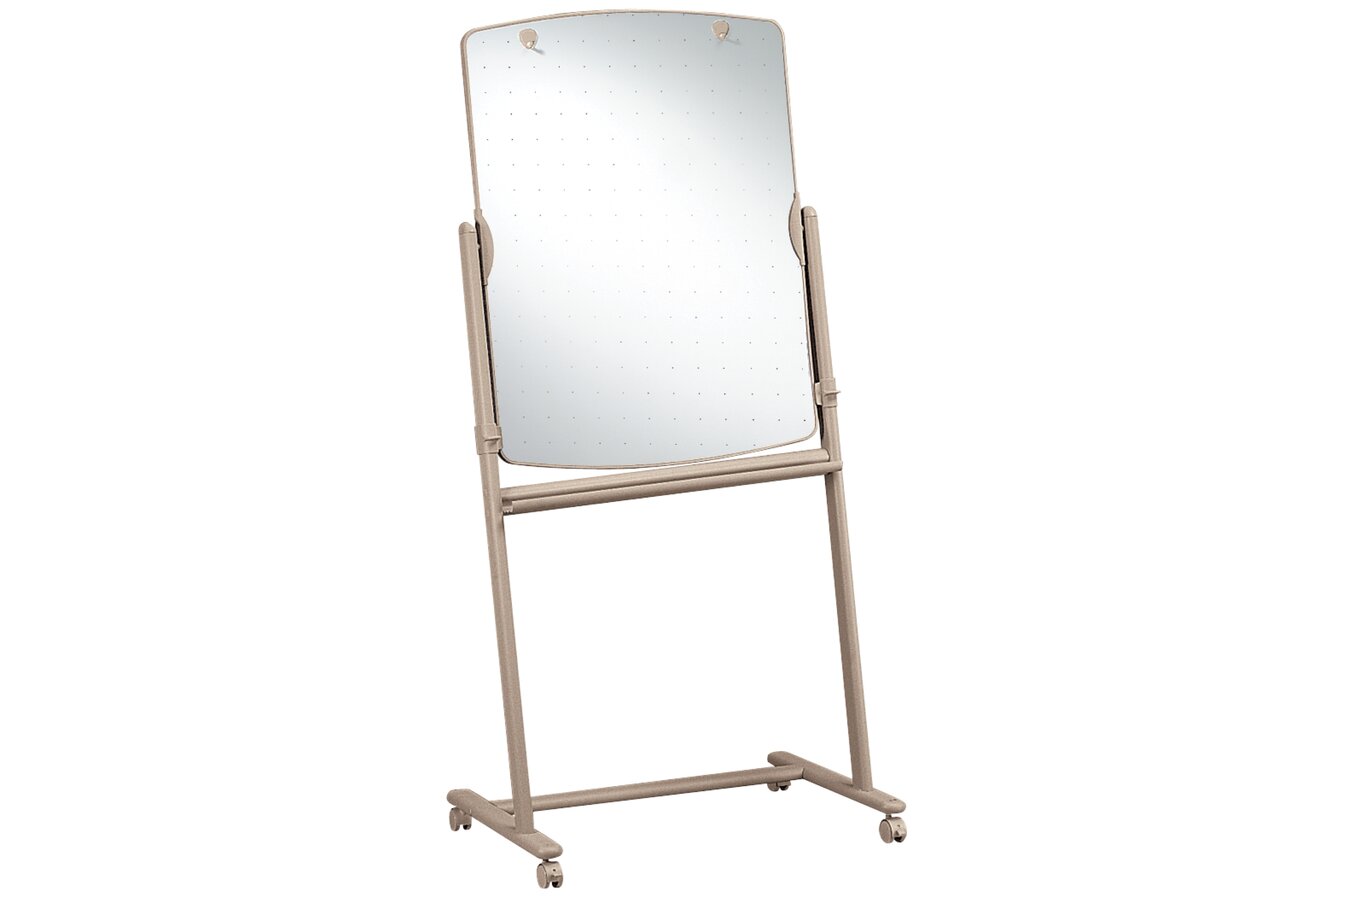 Dry Erase Board with A-Frame Easel, 29 x 41, White Surface, Silver Frame - Dry  Erase Boards & Accessories, UNIVERSAL OFFICE PRODUCTS